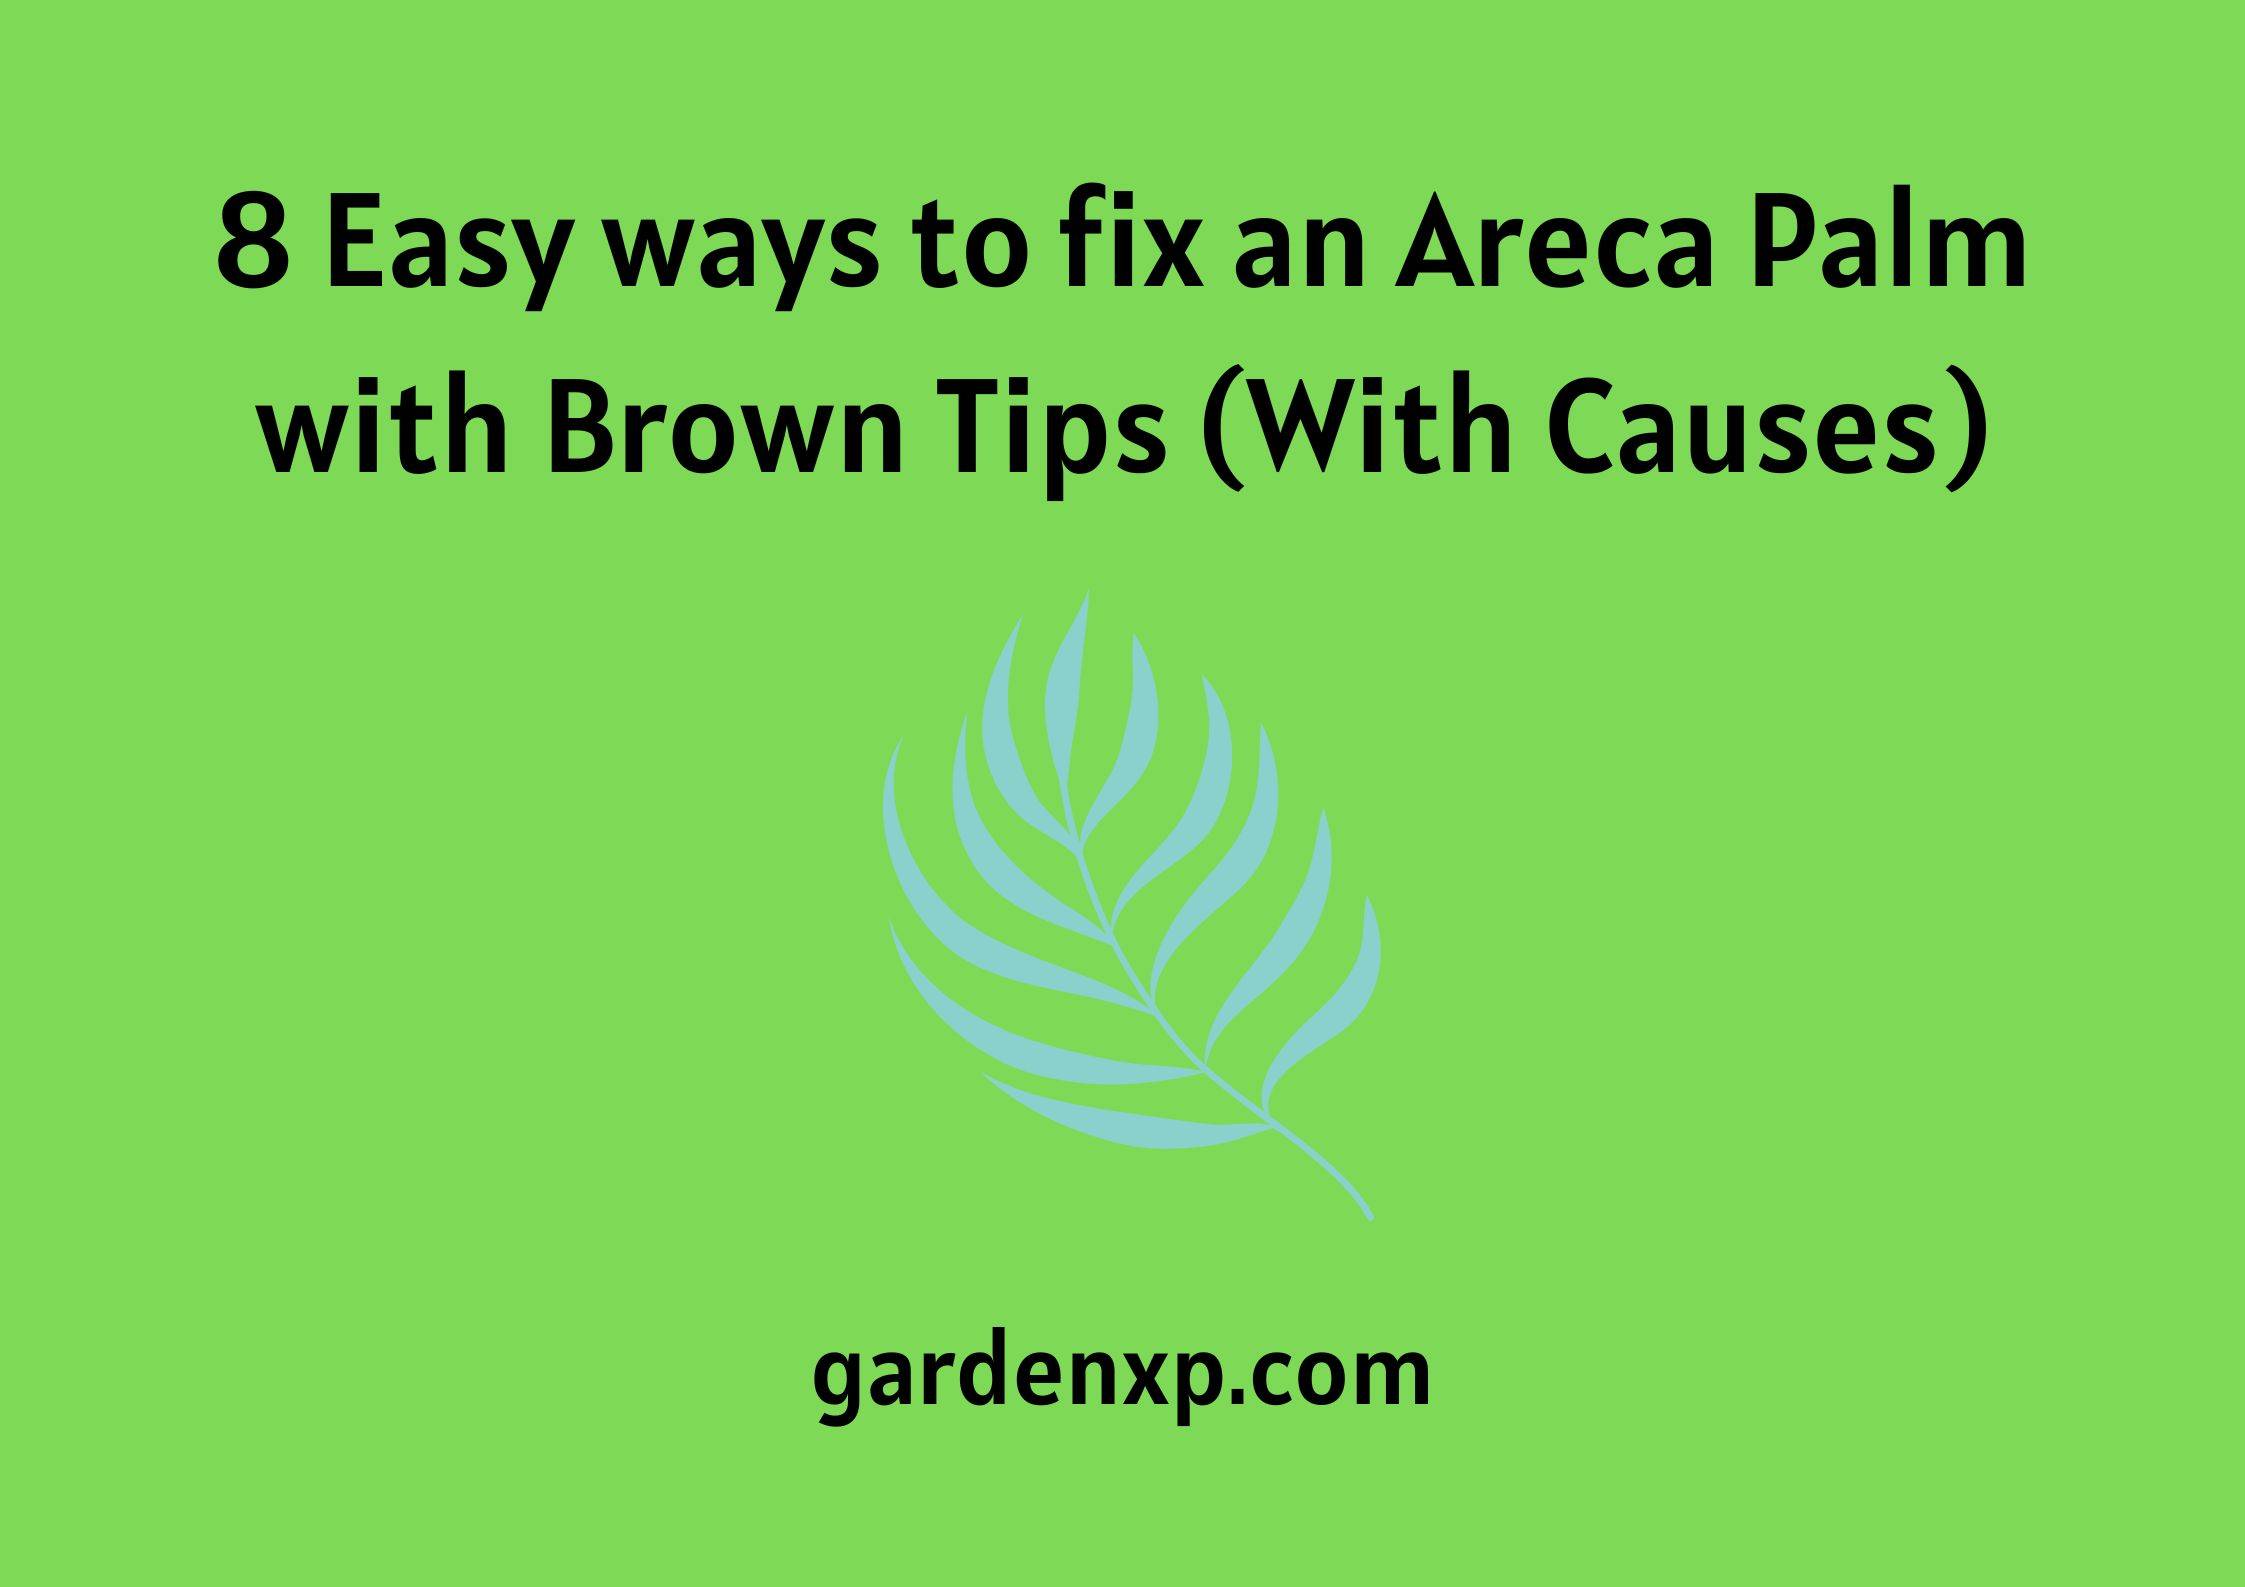 8 Easy ways to fix an Areca Palm with Brown Tips (With Causes)